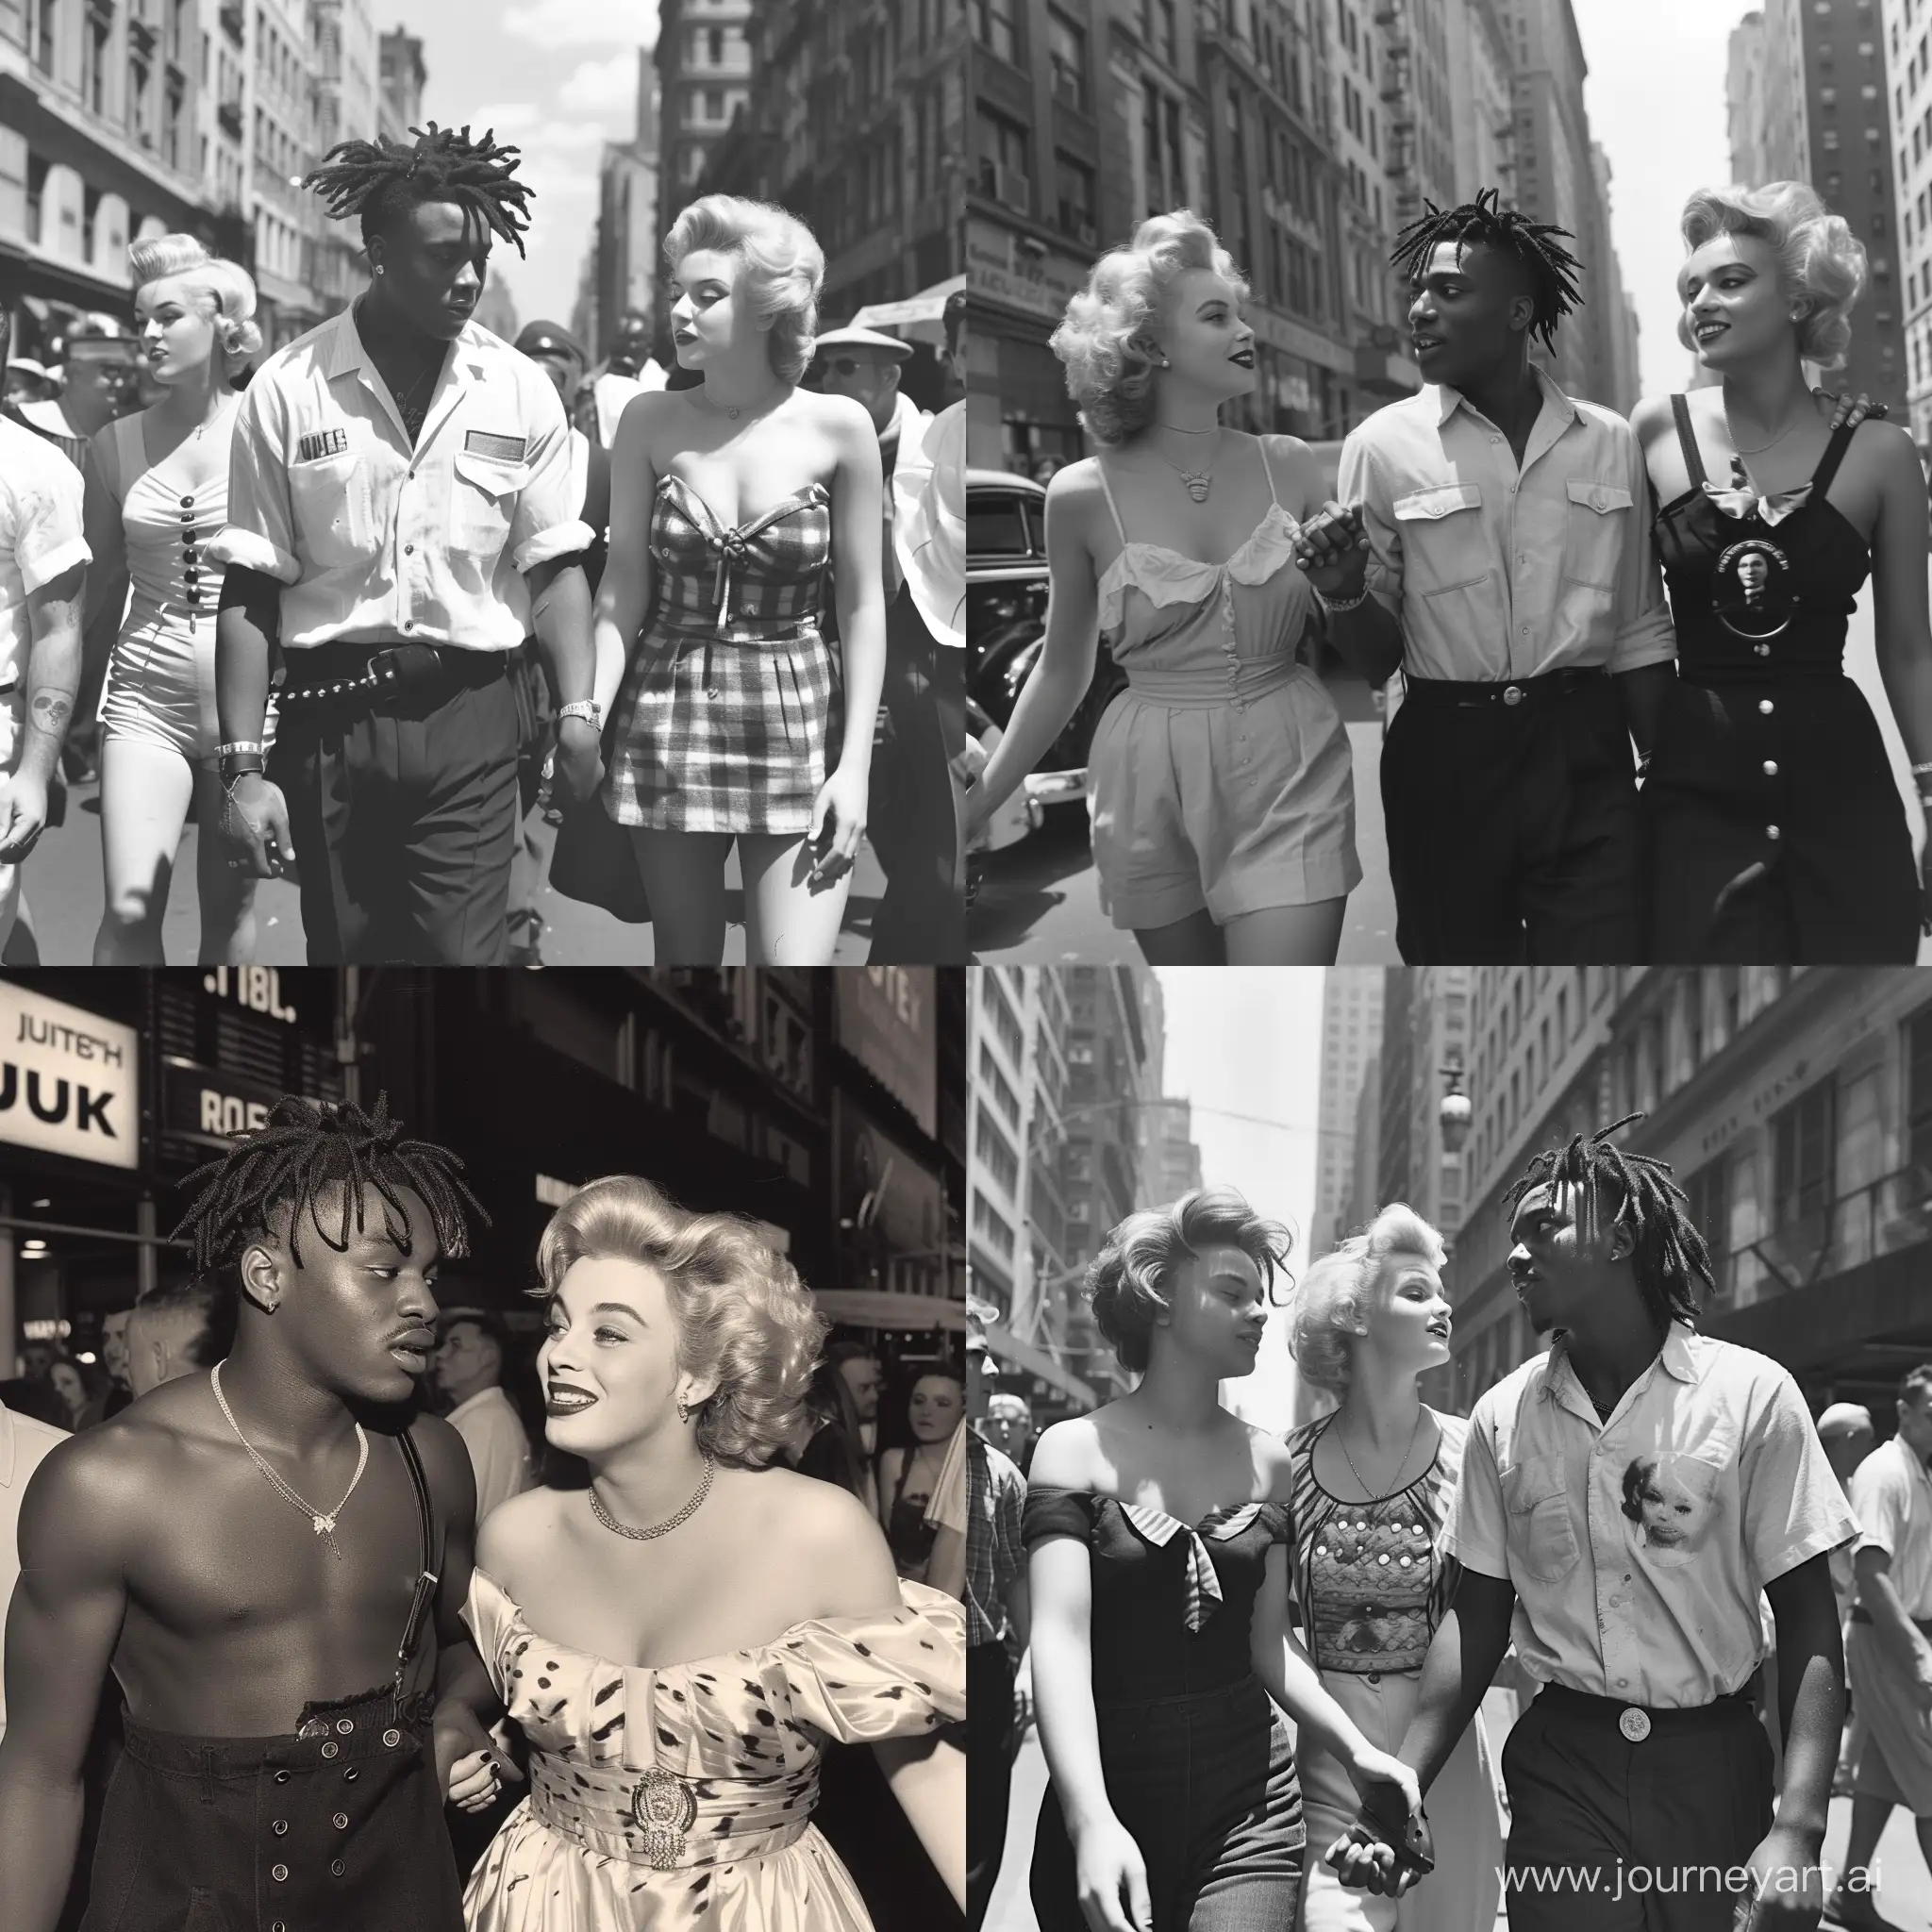 A 1950s Black and White Photograph,Juice WRLD  Walking in new york,Holding hands woth Marilyn Monroe.